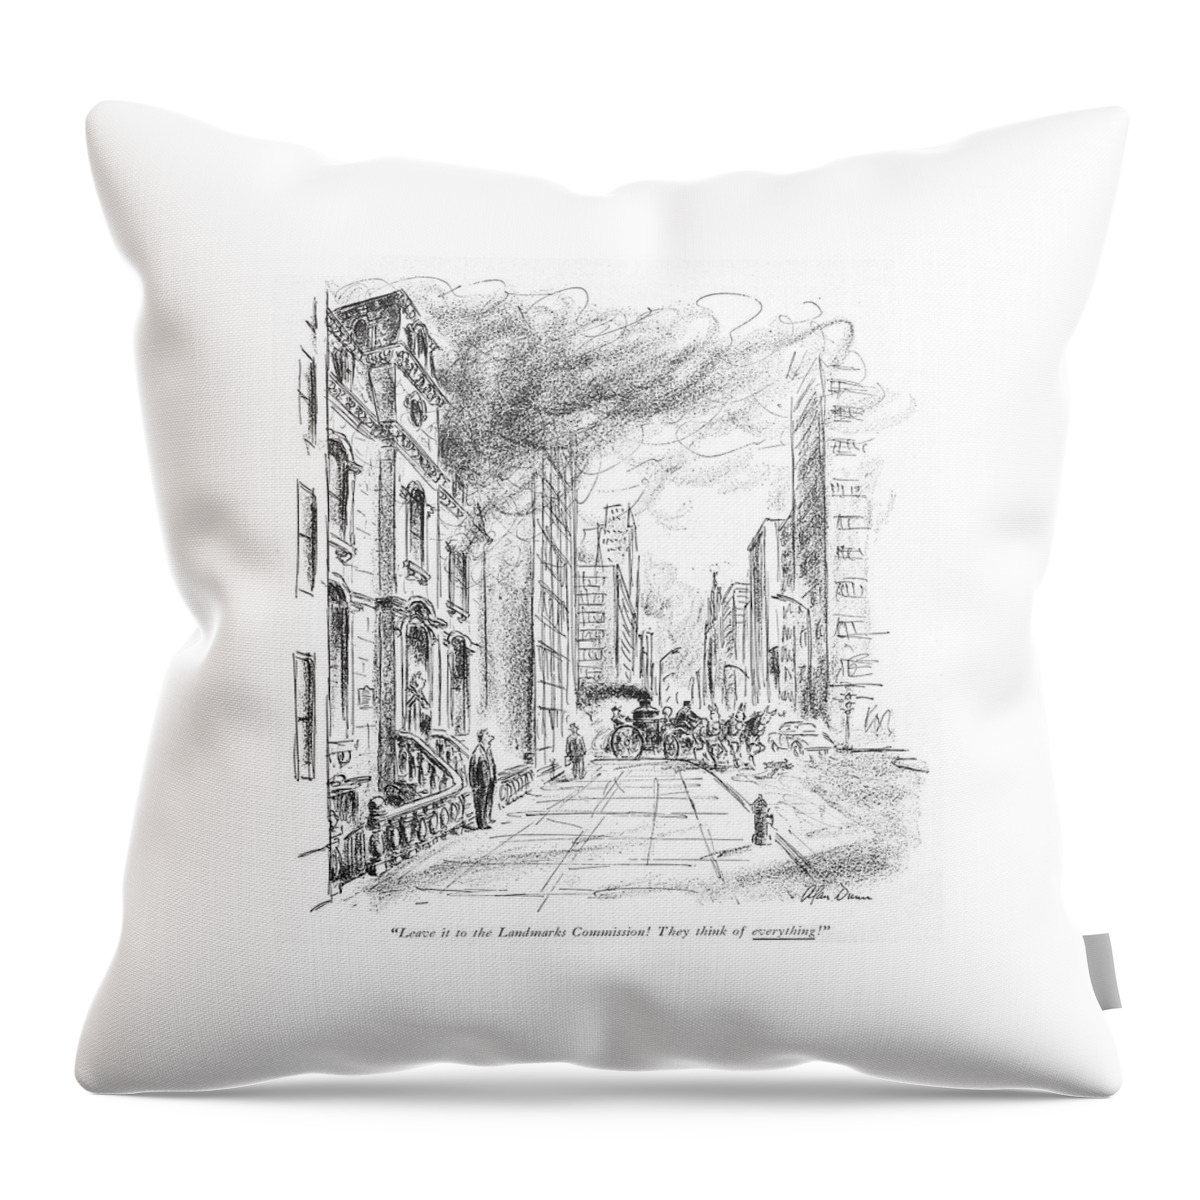 Leave It To The Landmarks Commission! They Think Throw Pillow